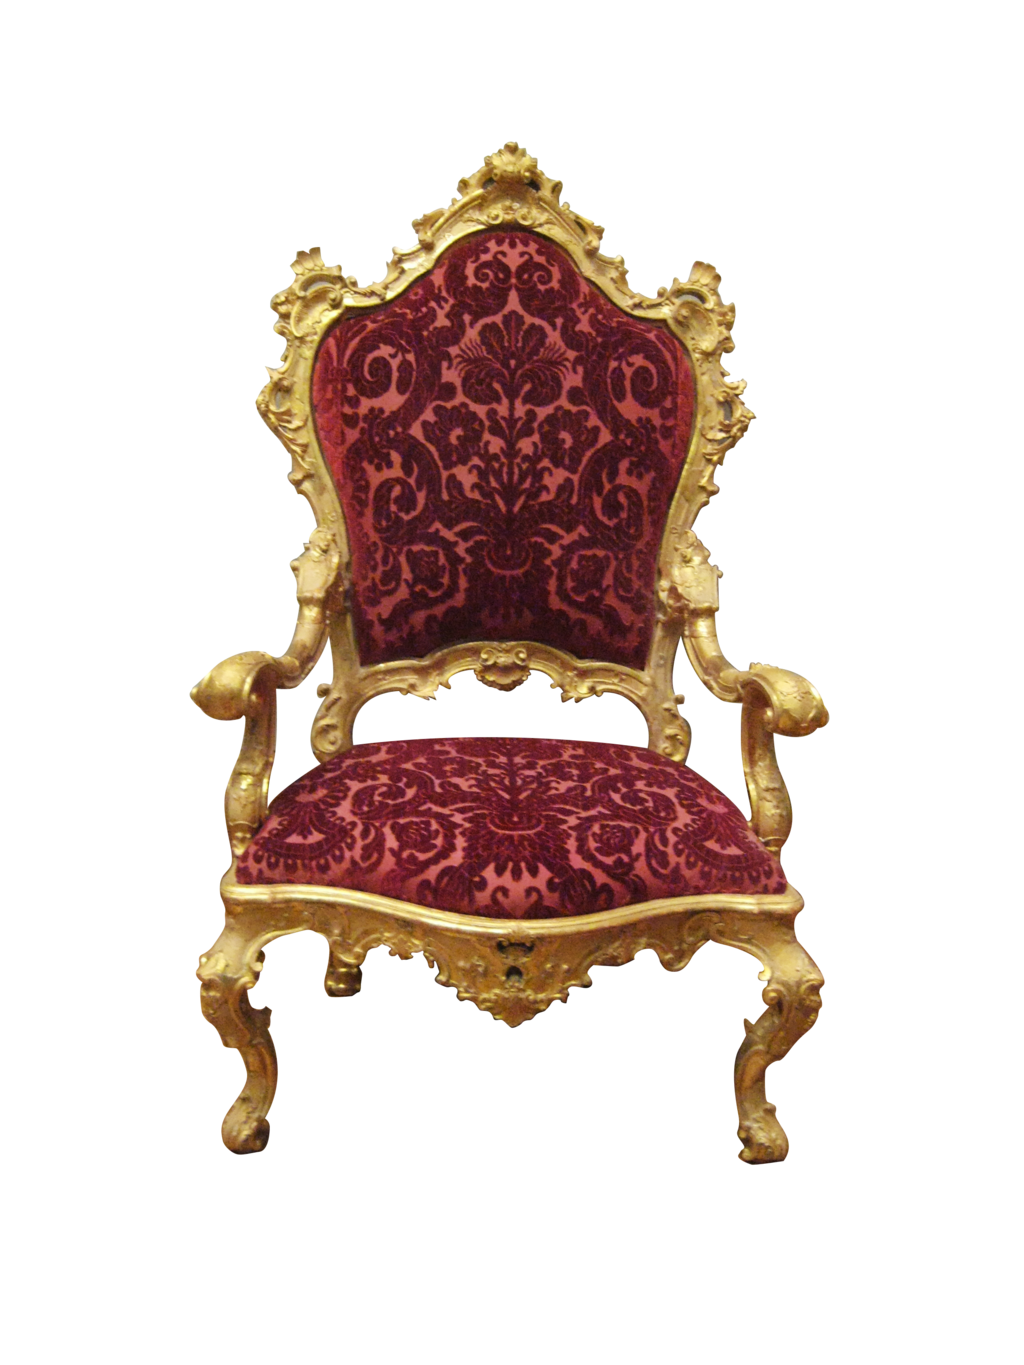 Download PNG image - Throne PNG Image 